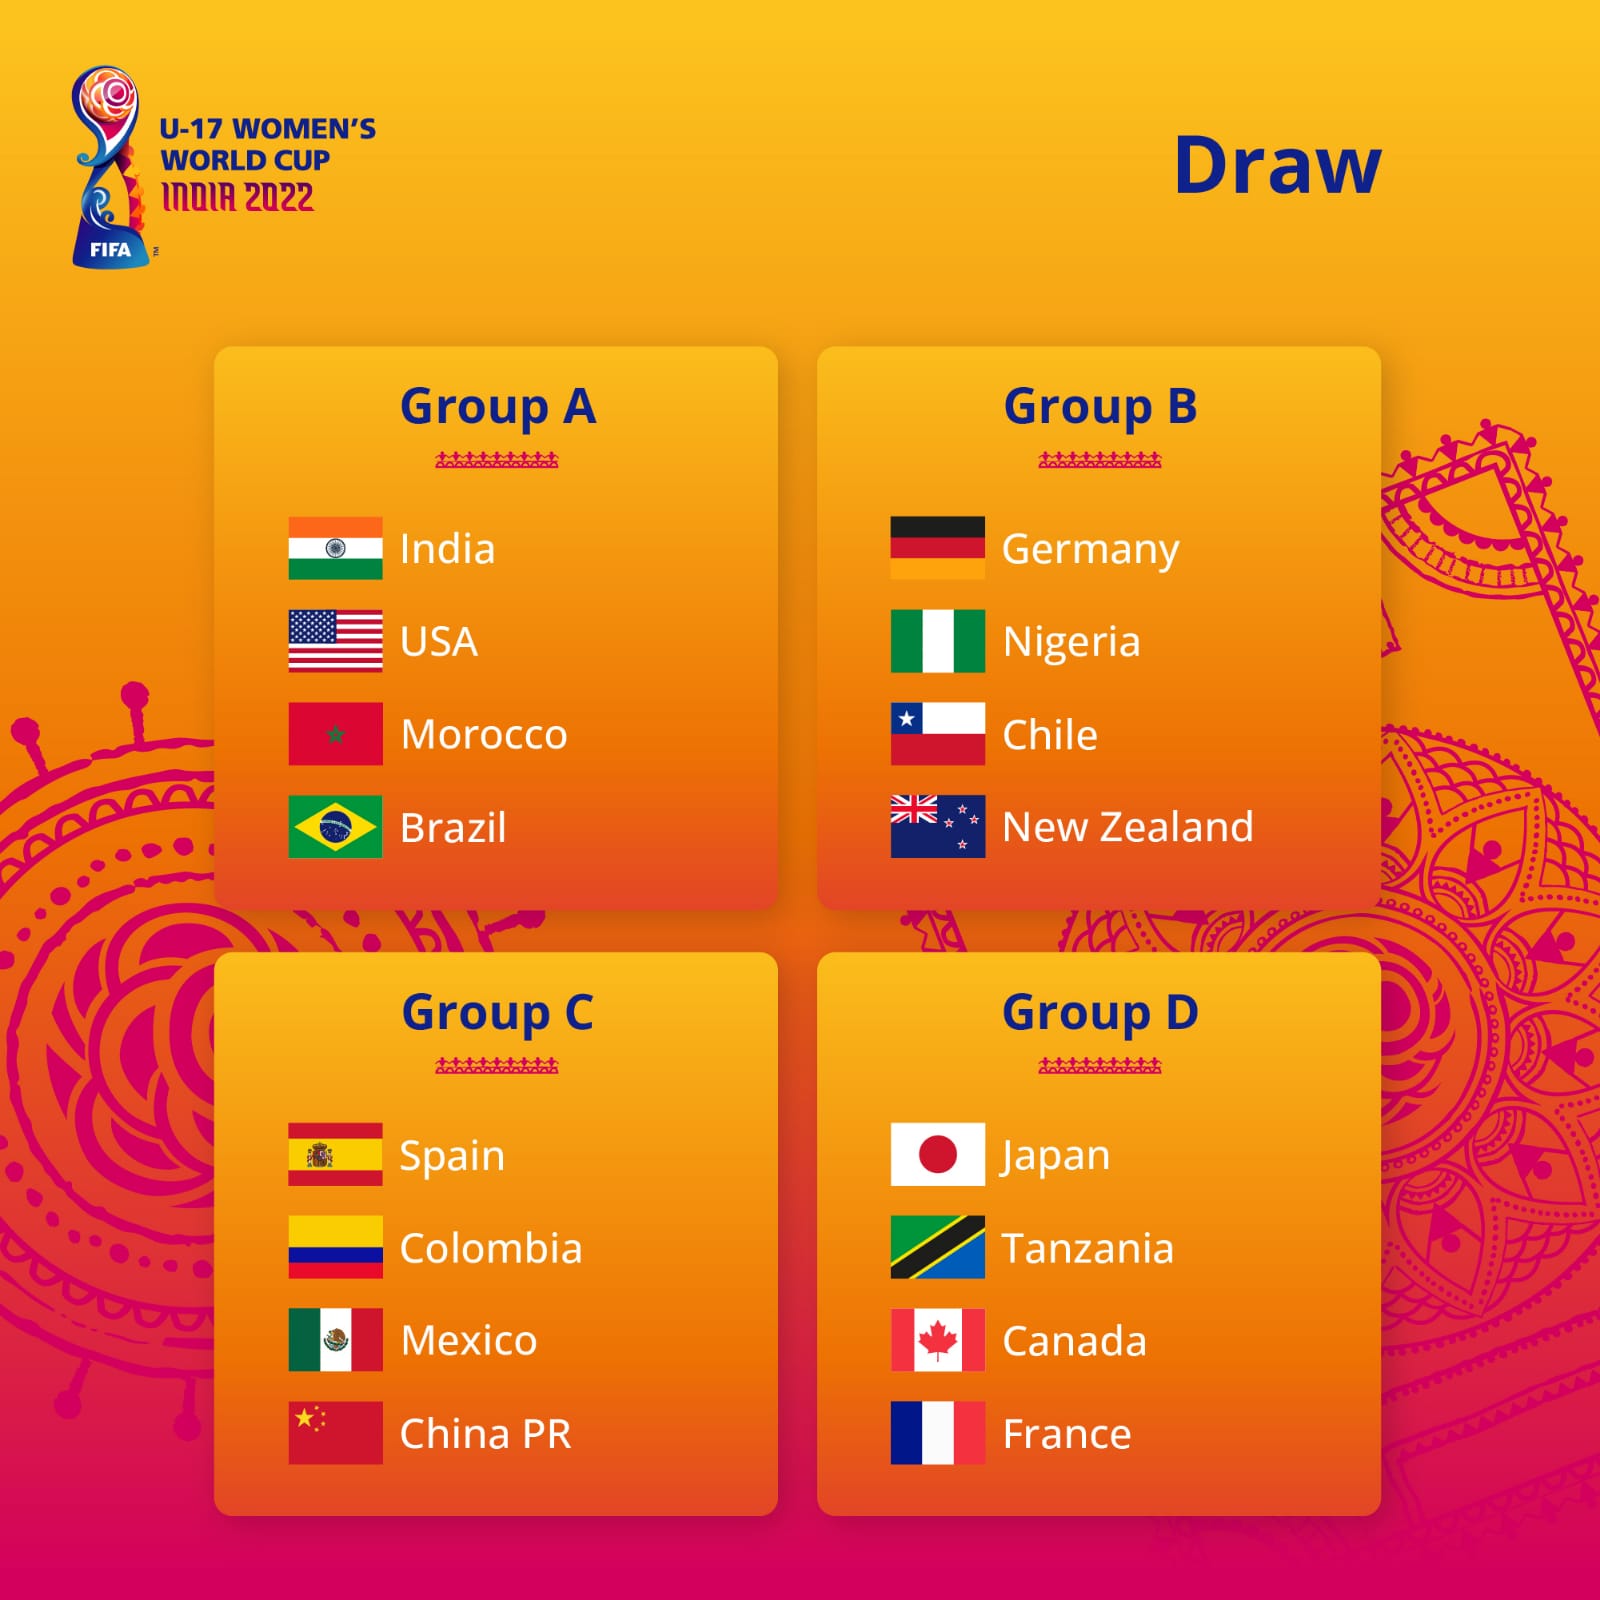 FIFA U-17 Women's World Cup Draw: India to Kickstart World Cup against USA, to FACE TOUGH competition from Brazil - Check Out